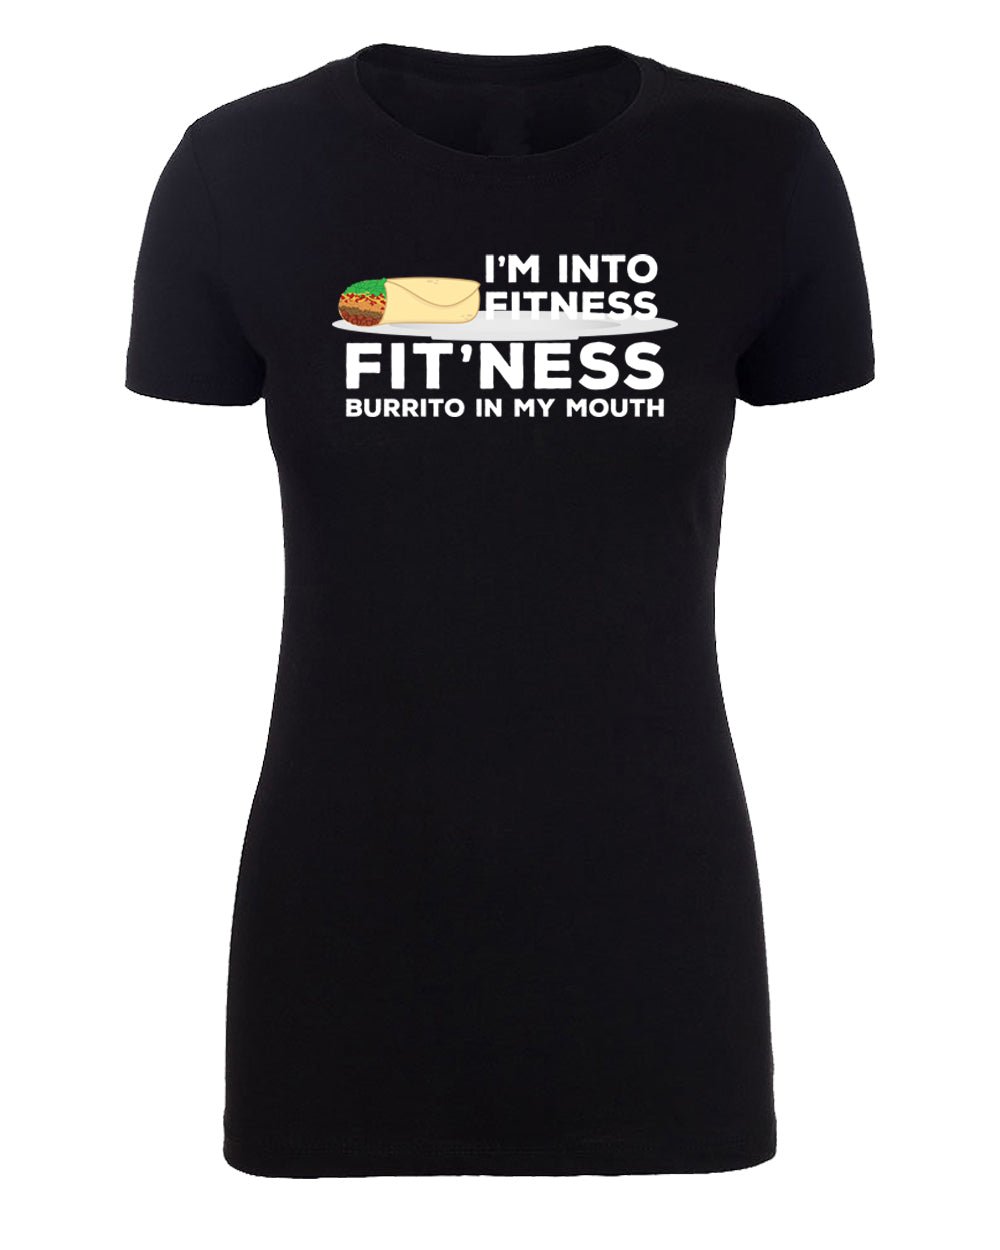 I'm Into Fitness - Fit'ness Burrito in My Mouth - Womens T Shirts - Mato & Hash